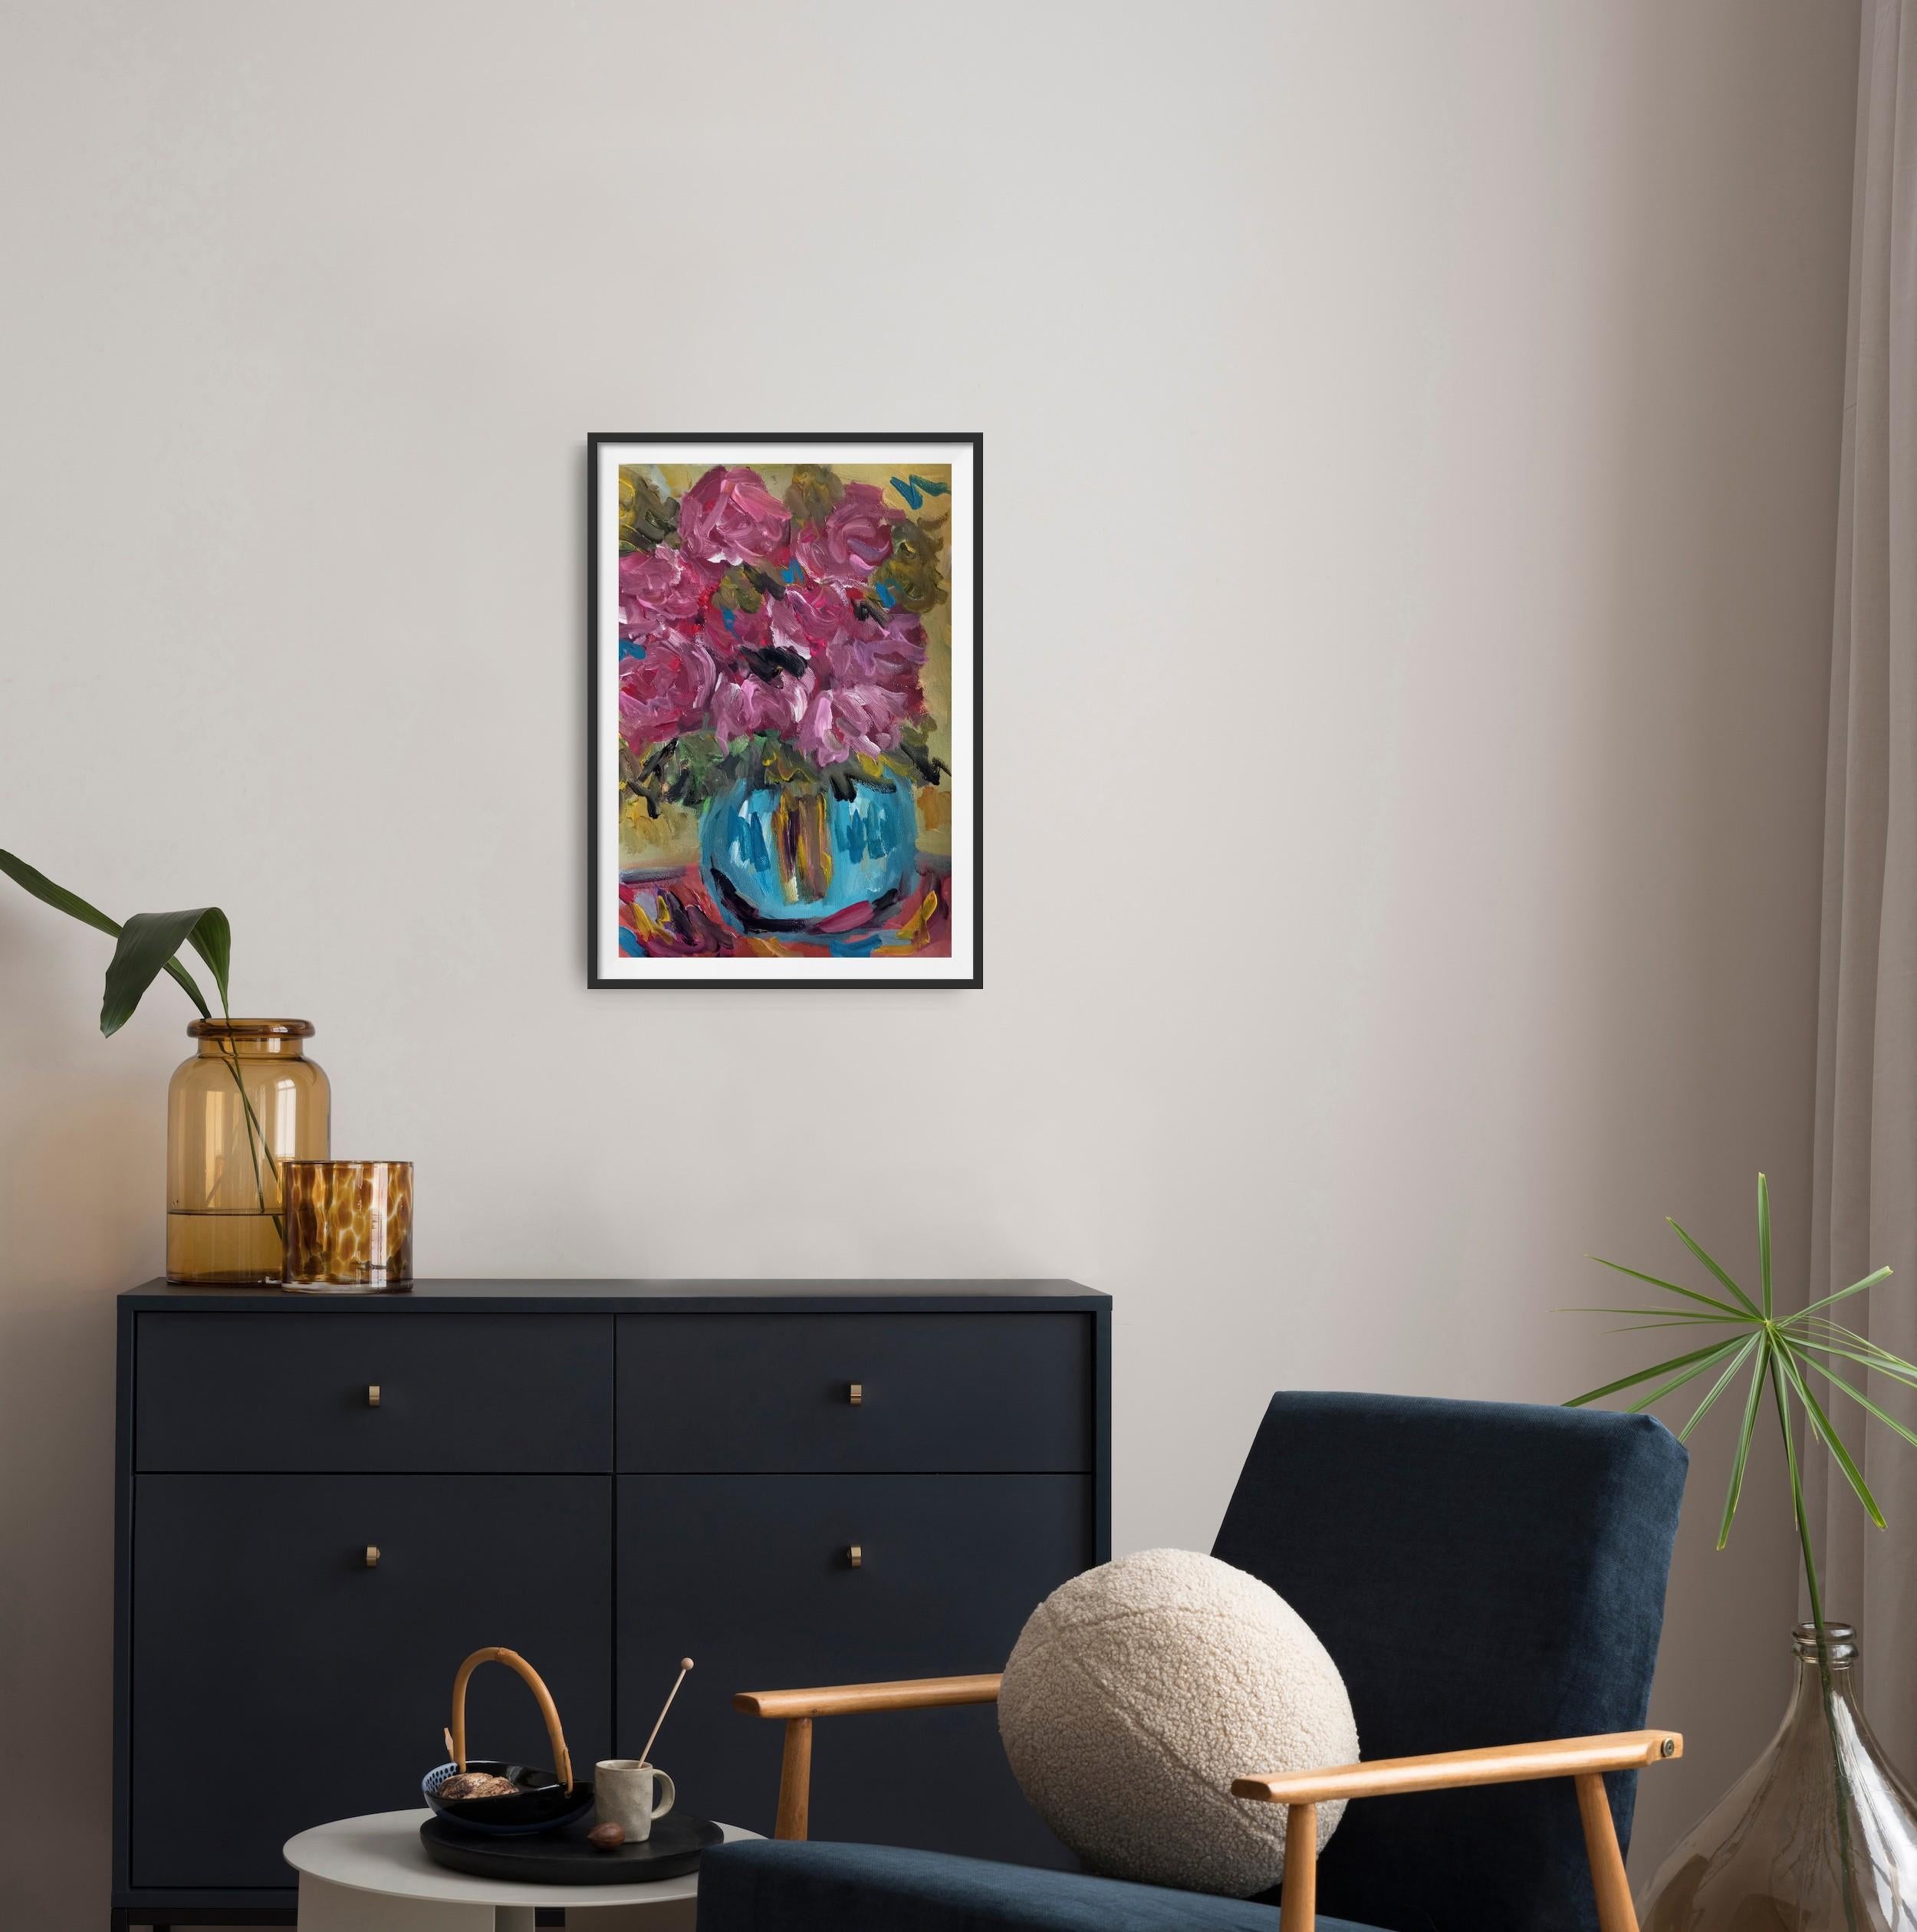 This artwork belongs to my “Floral” series which is full of expressive brush strokes where I could experience a floral theme.  It is a bold and eclectic mix of art which radiates striking colors, spontaneity, vividness, freedom and more importantly,